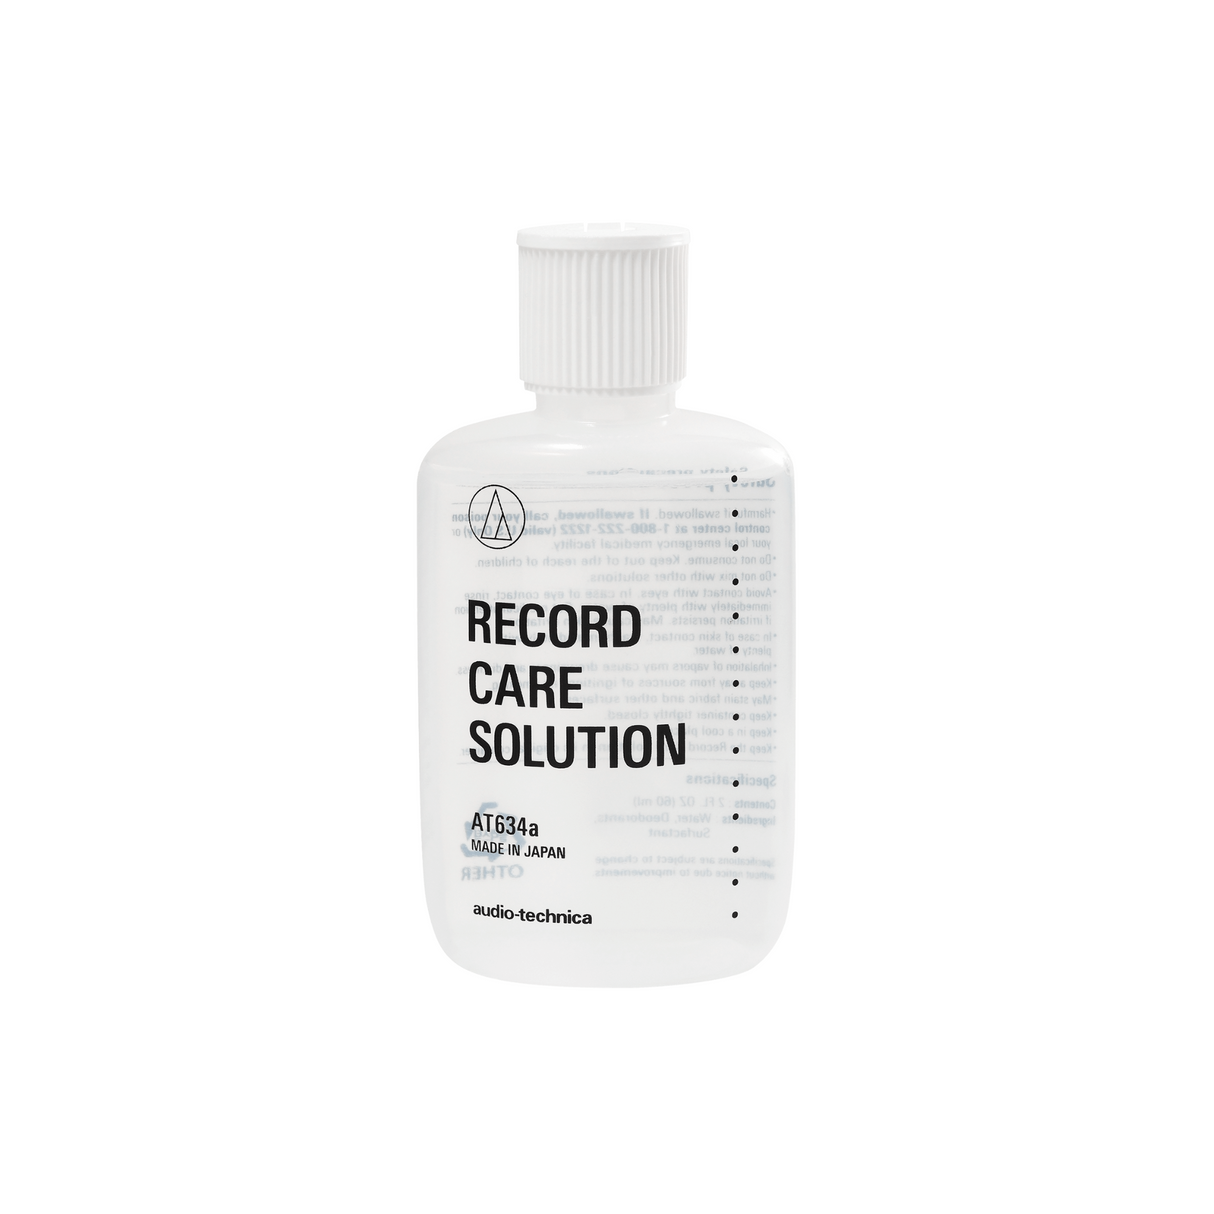 Audio Technica AT634a Record Cleaning Fluid